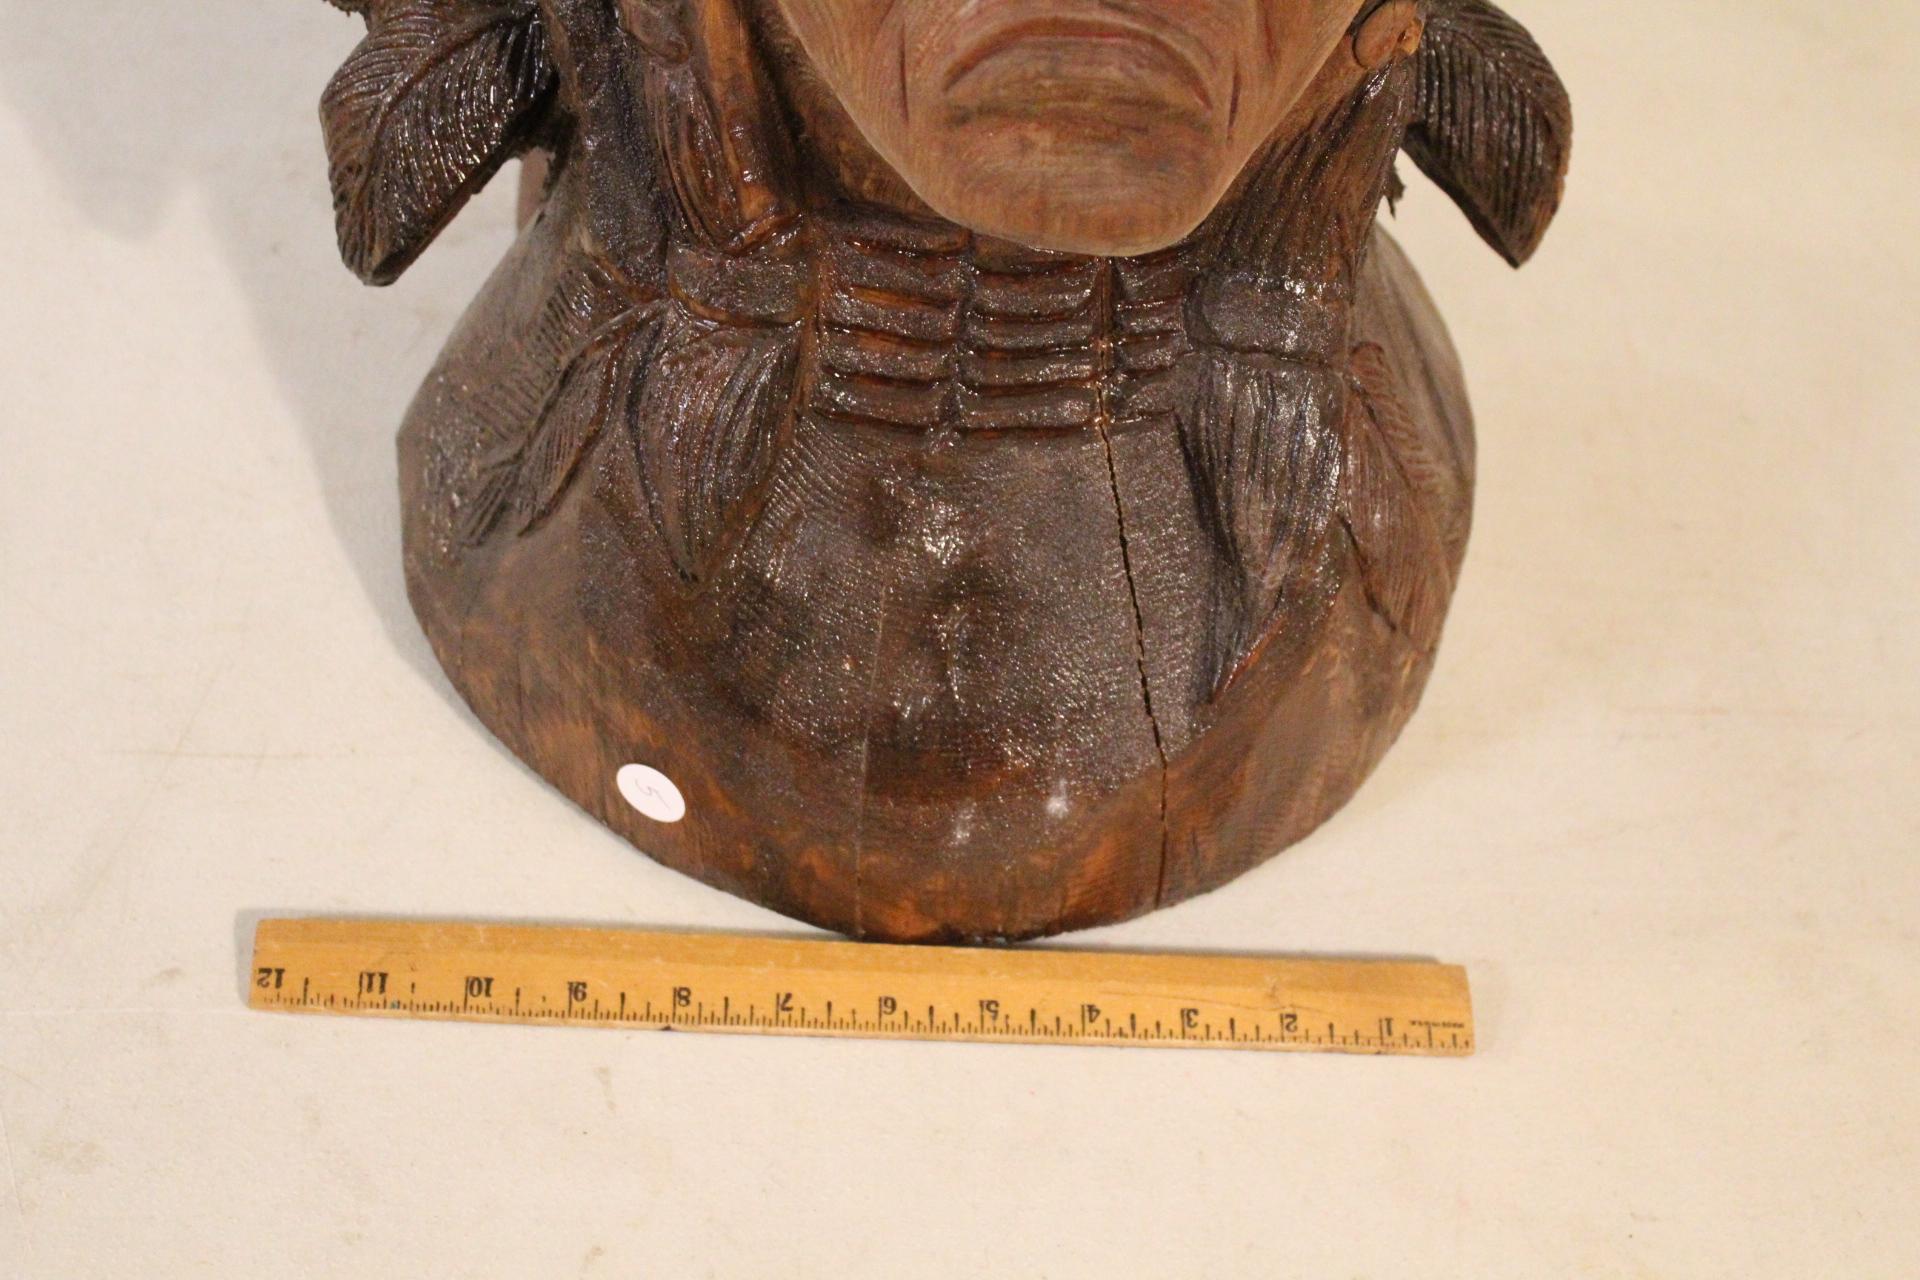 Large Carved Wooden Native American Indian Chief Bust 18" Tall x 12" Wide